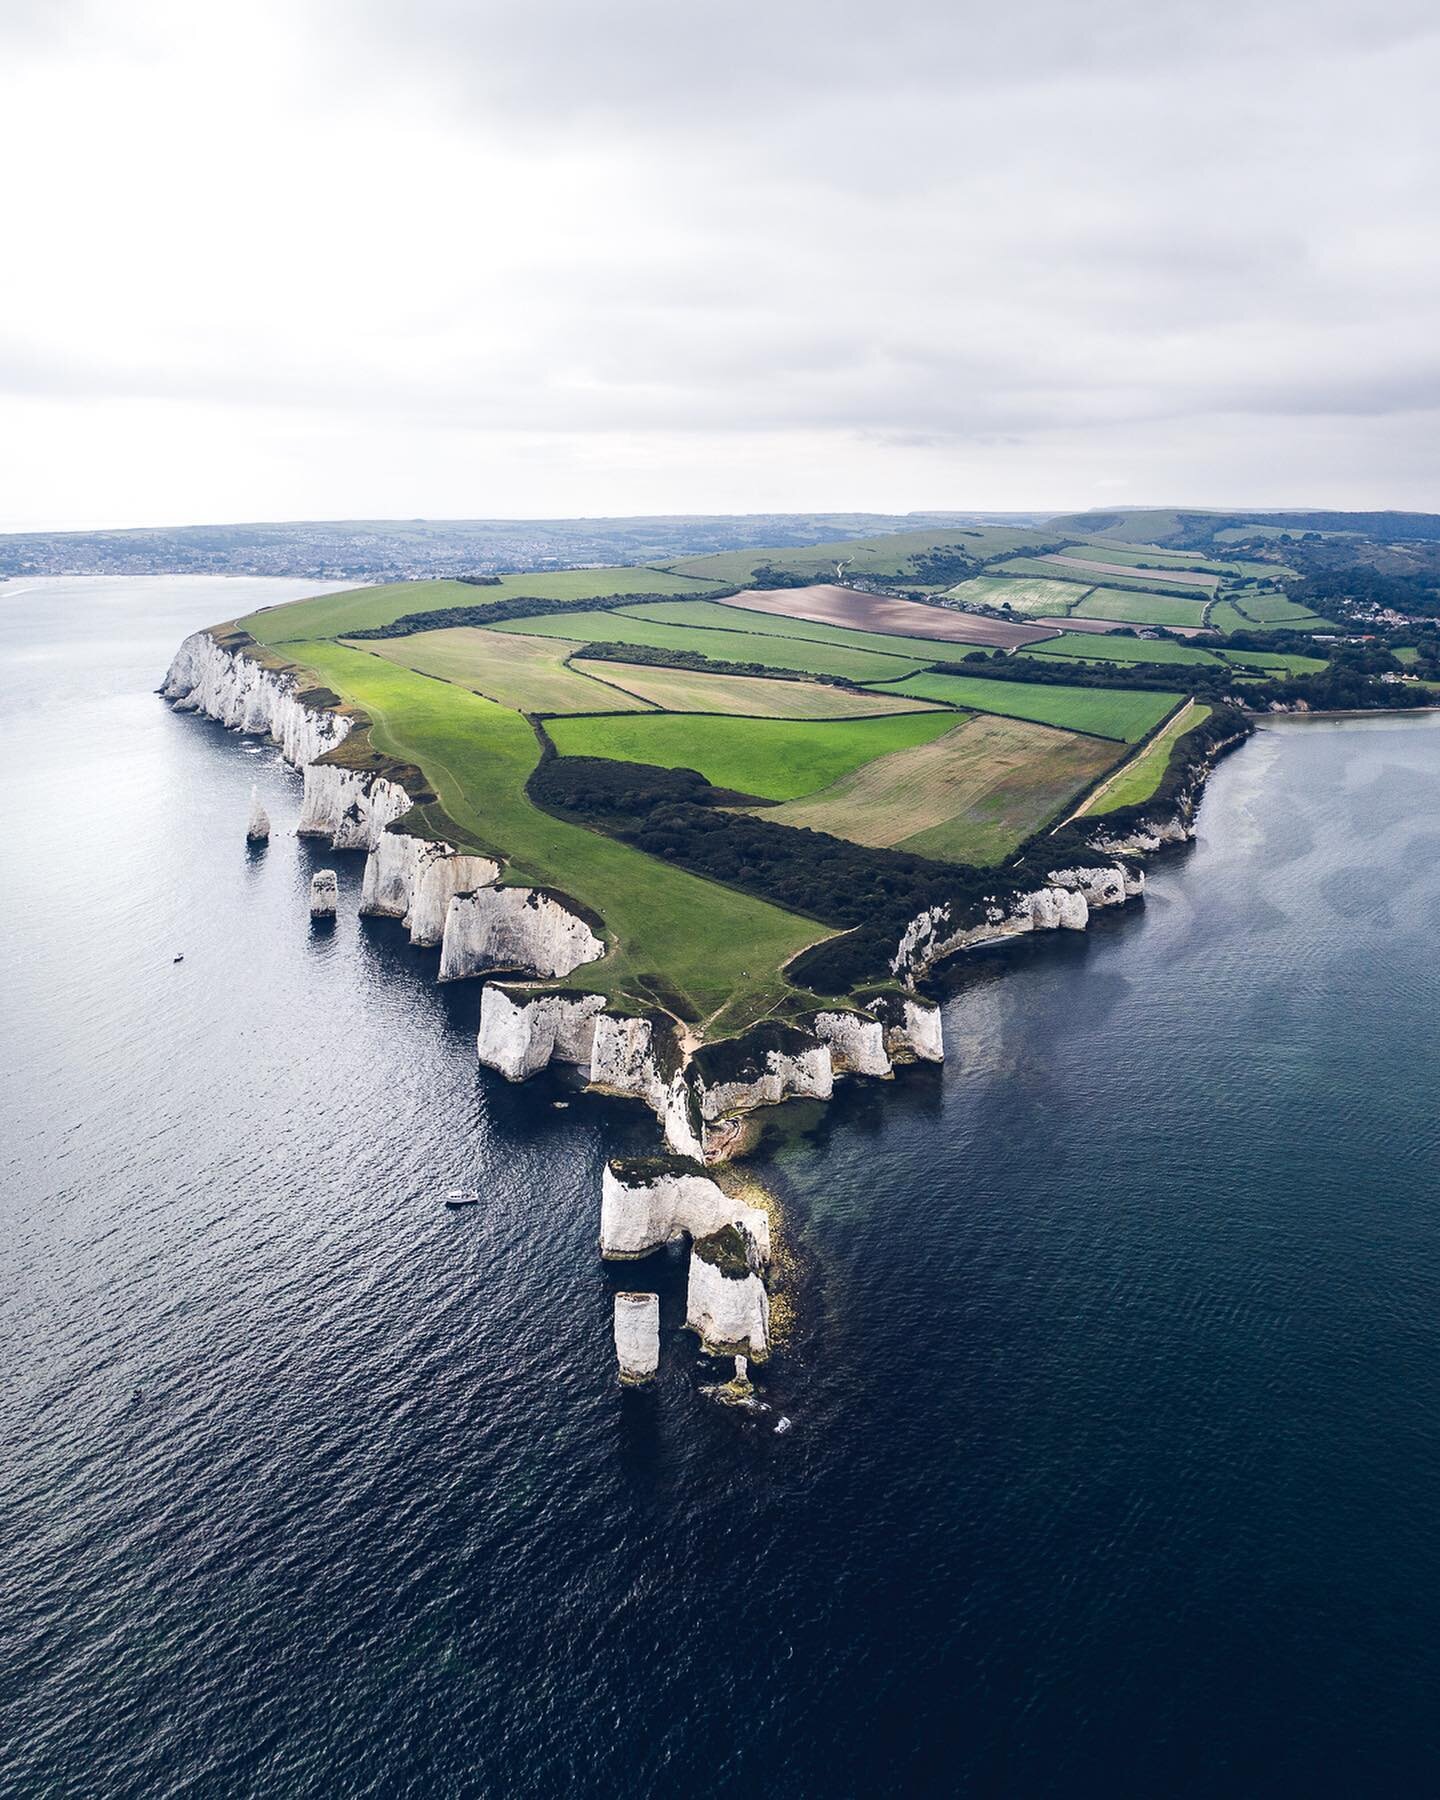 Old Harry Rocks is a place i've been wanting to visit with the drone for years and years. Recently we took finally took the detour and drove an extra few hours to see this crazy coastline. When you are standing down there it looks kind of cool but yo